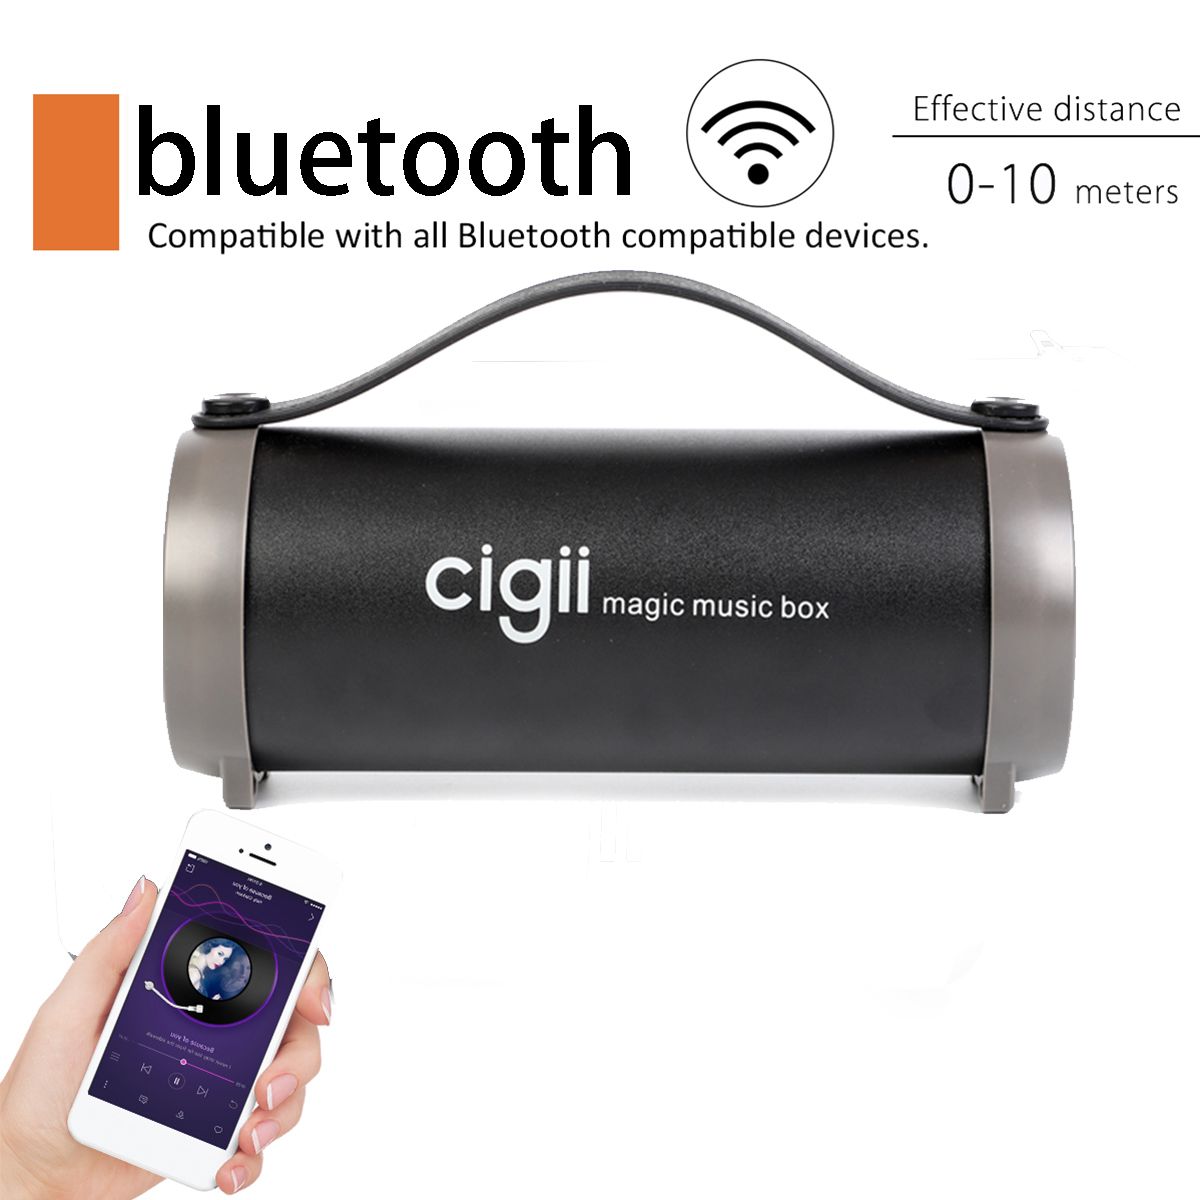 CIGII-S33D-1500mAh-35mm-Wireless-Portable-bluetooth-Speaker-Subwoofer-Noise-Cancelling-Support-FM-Ra-1567073